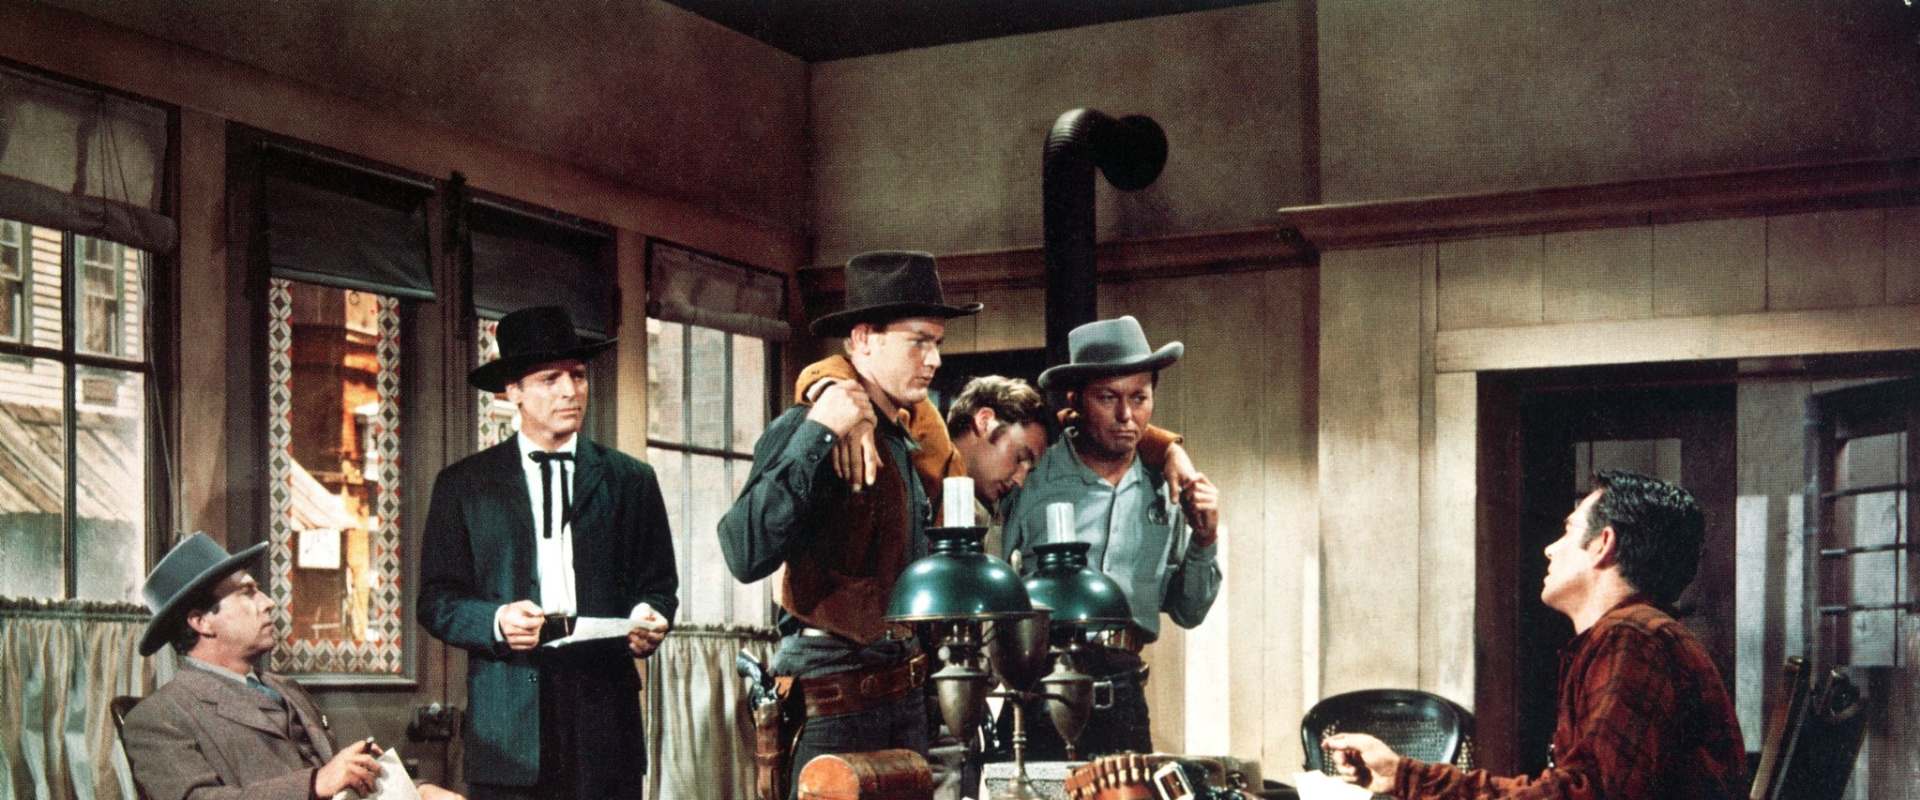 Gunfight at the O.K. Corral background 1